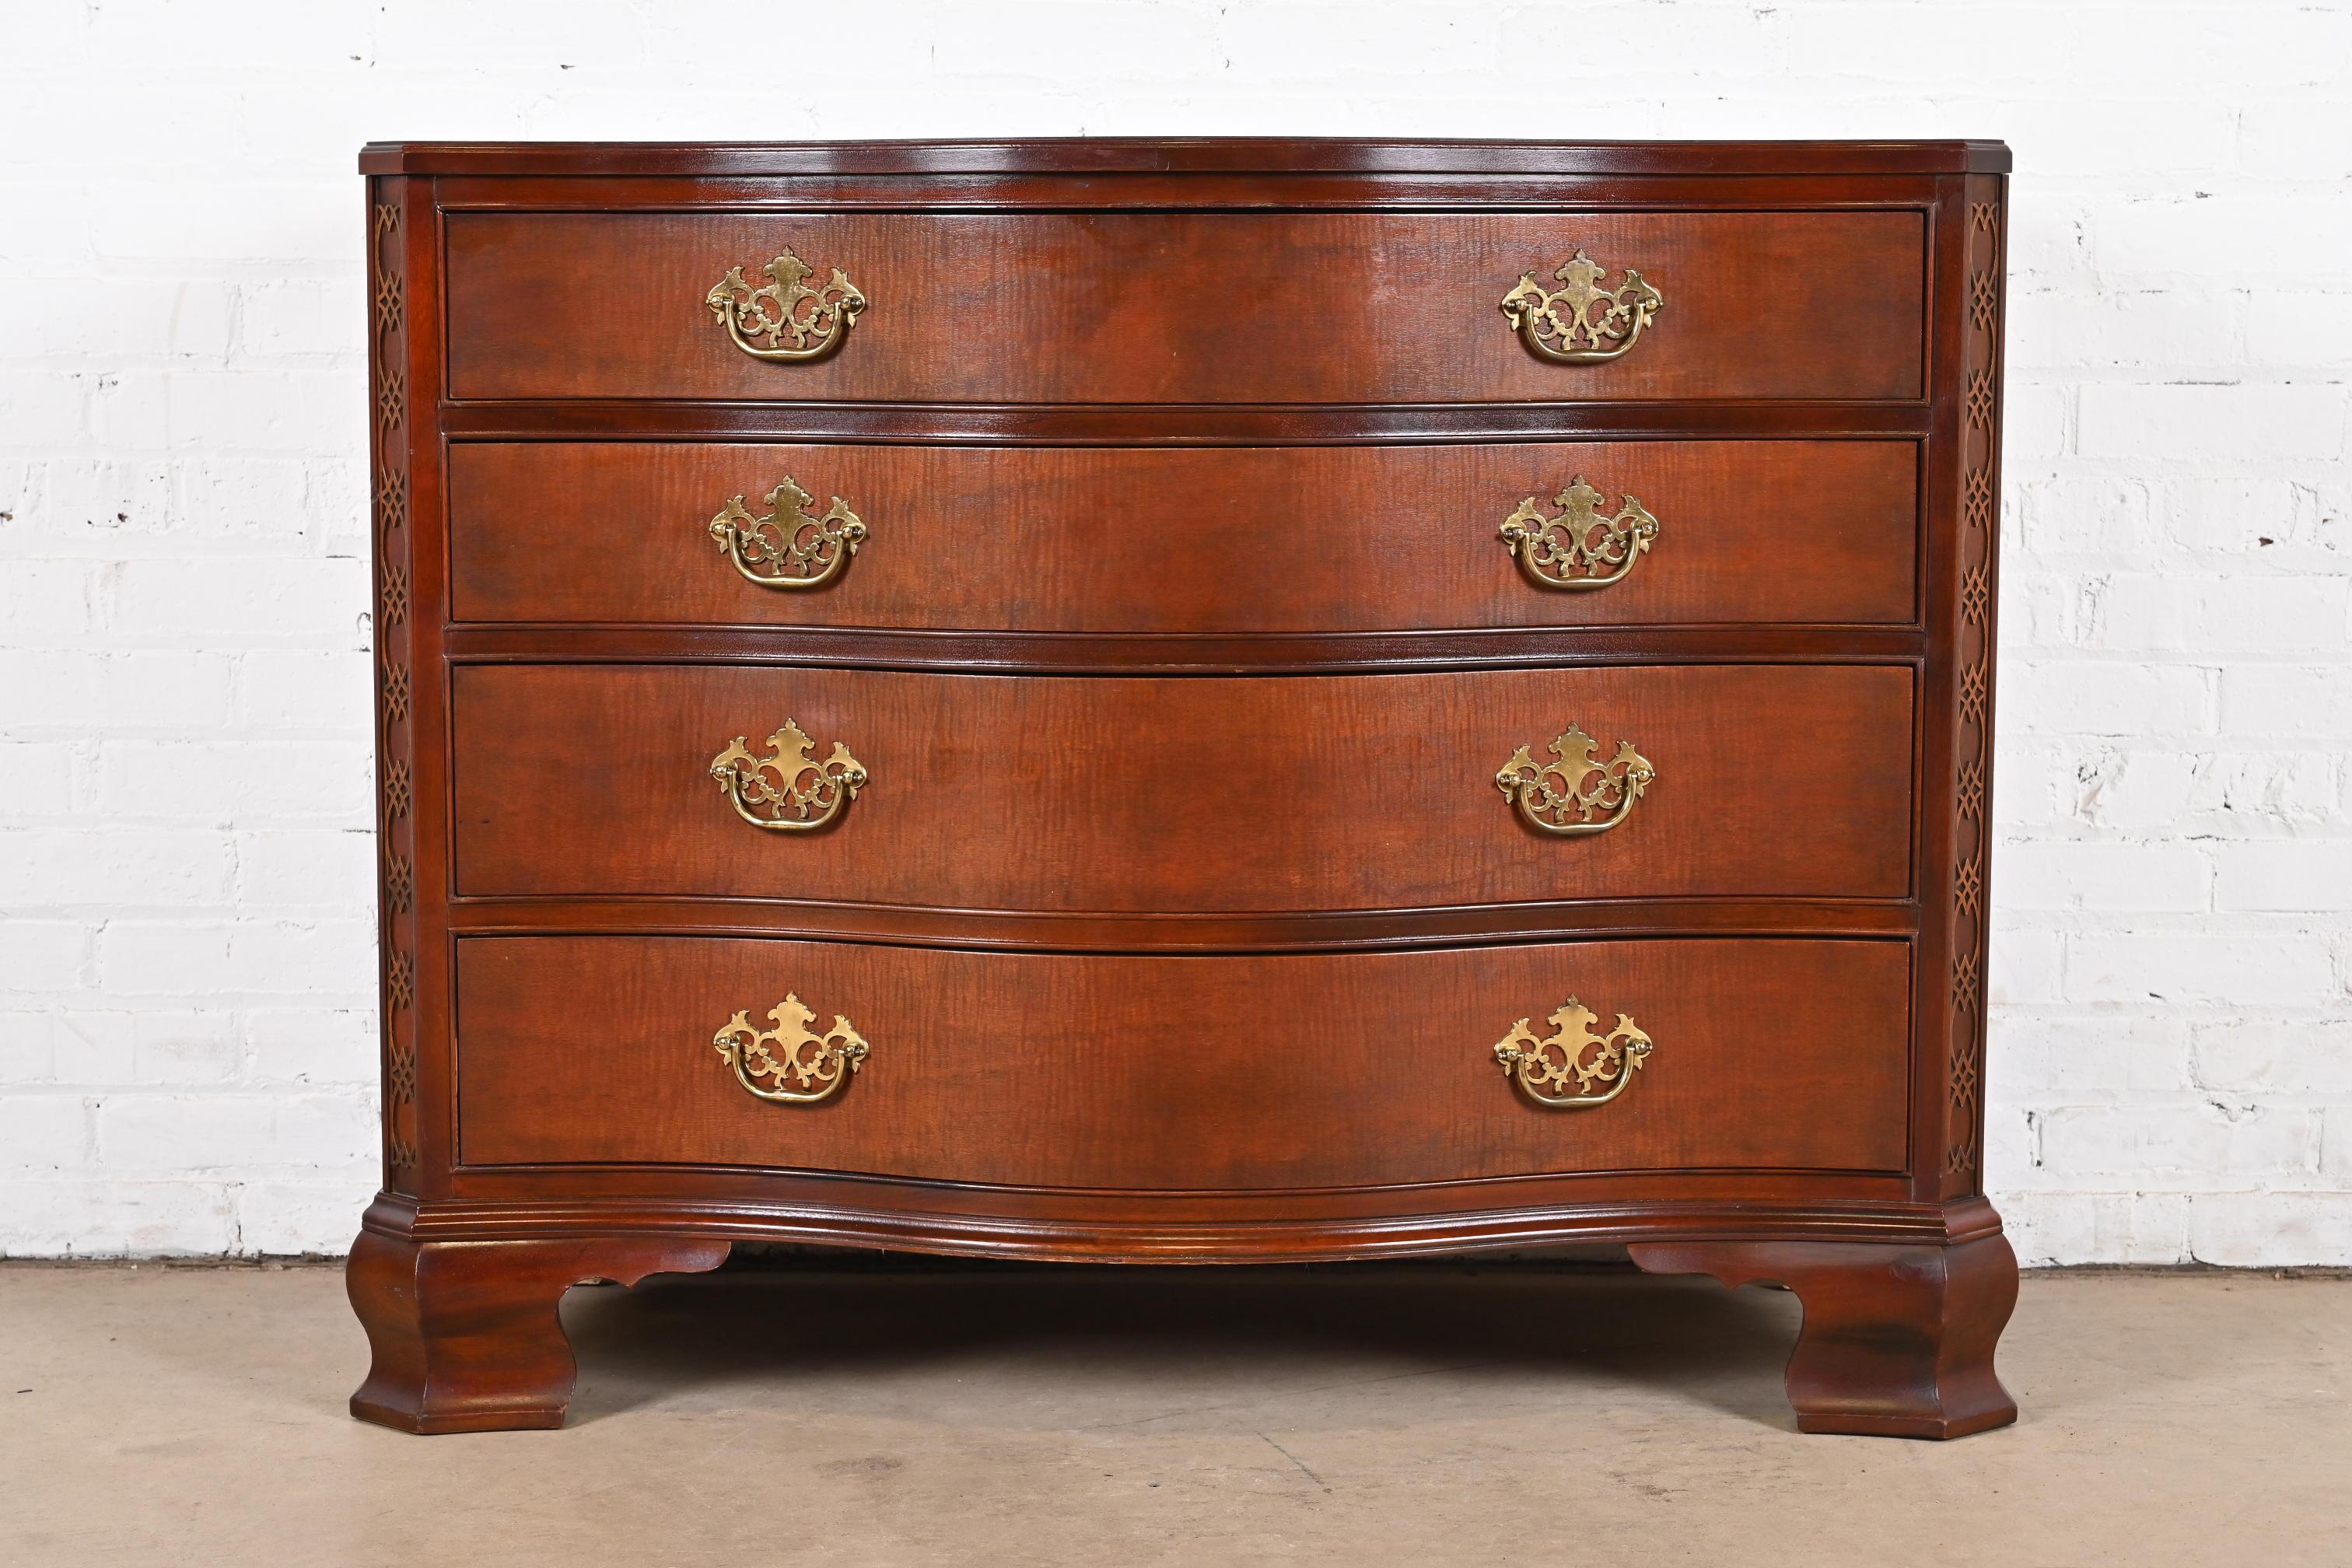 An exceptional Georgian or Chippendale style serpentine front dresser or chest of drawers

By Baker Furniture, 